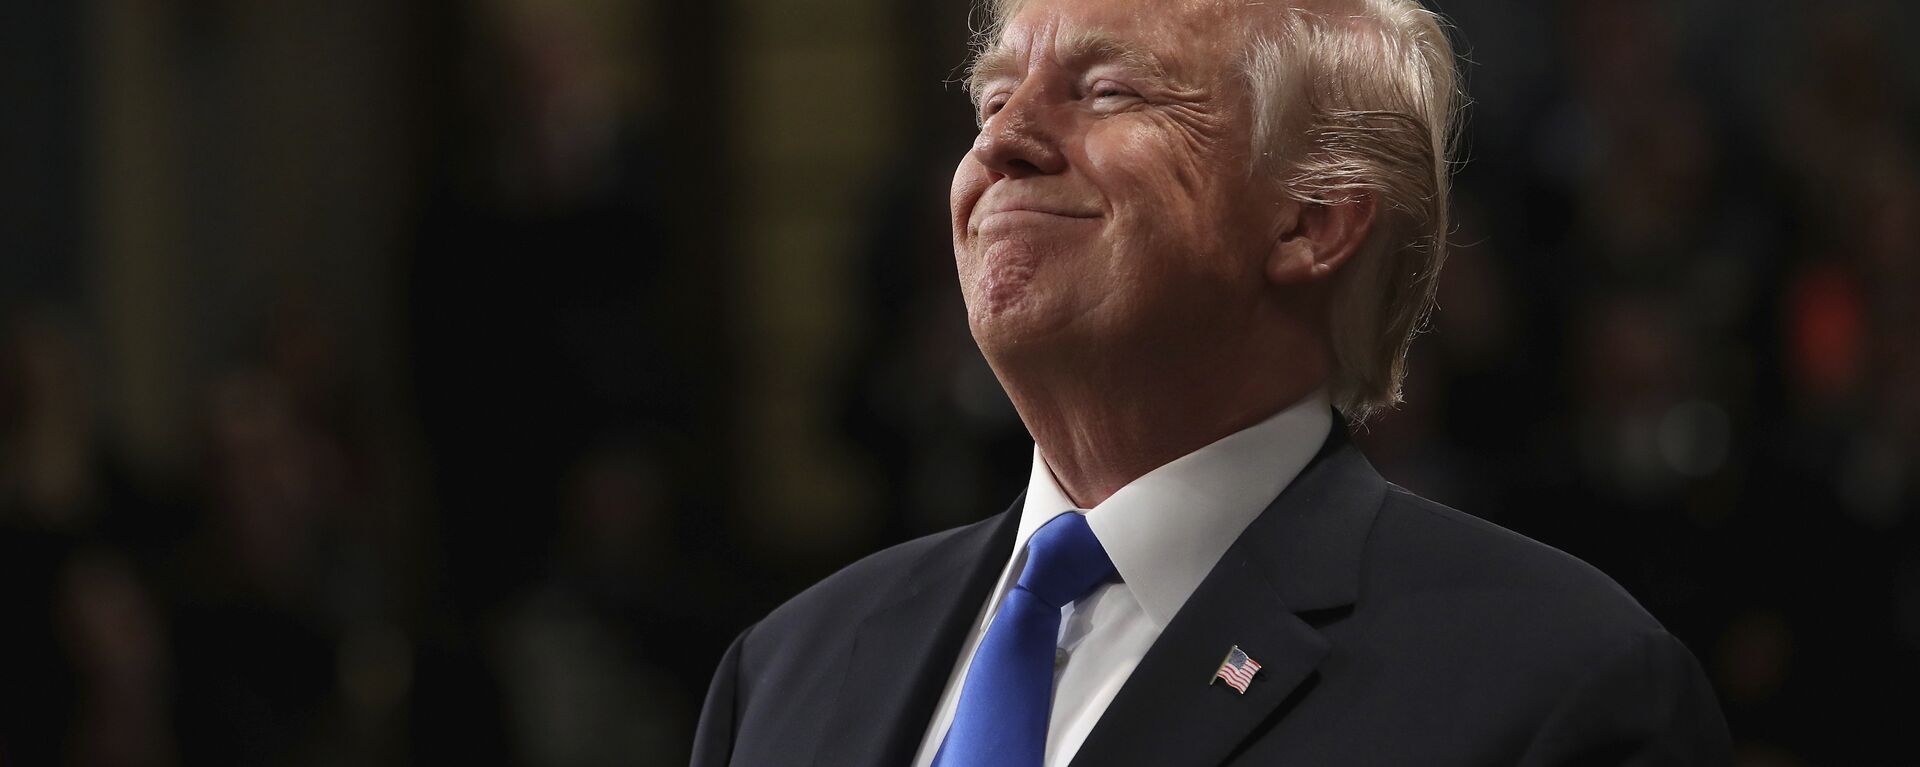 President Donald Trump smiles during State of the Union address in the House chamber of the U.S. Capitol to a joint session of Congress Tuesday, Jan. 30, 2018 in Washington - Sputnik International, 1920, 09.05.2021